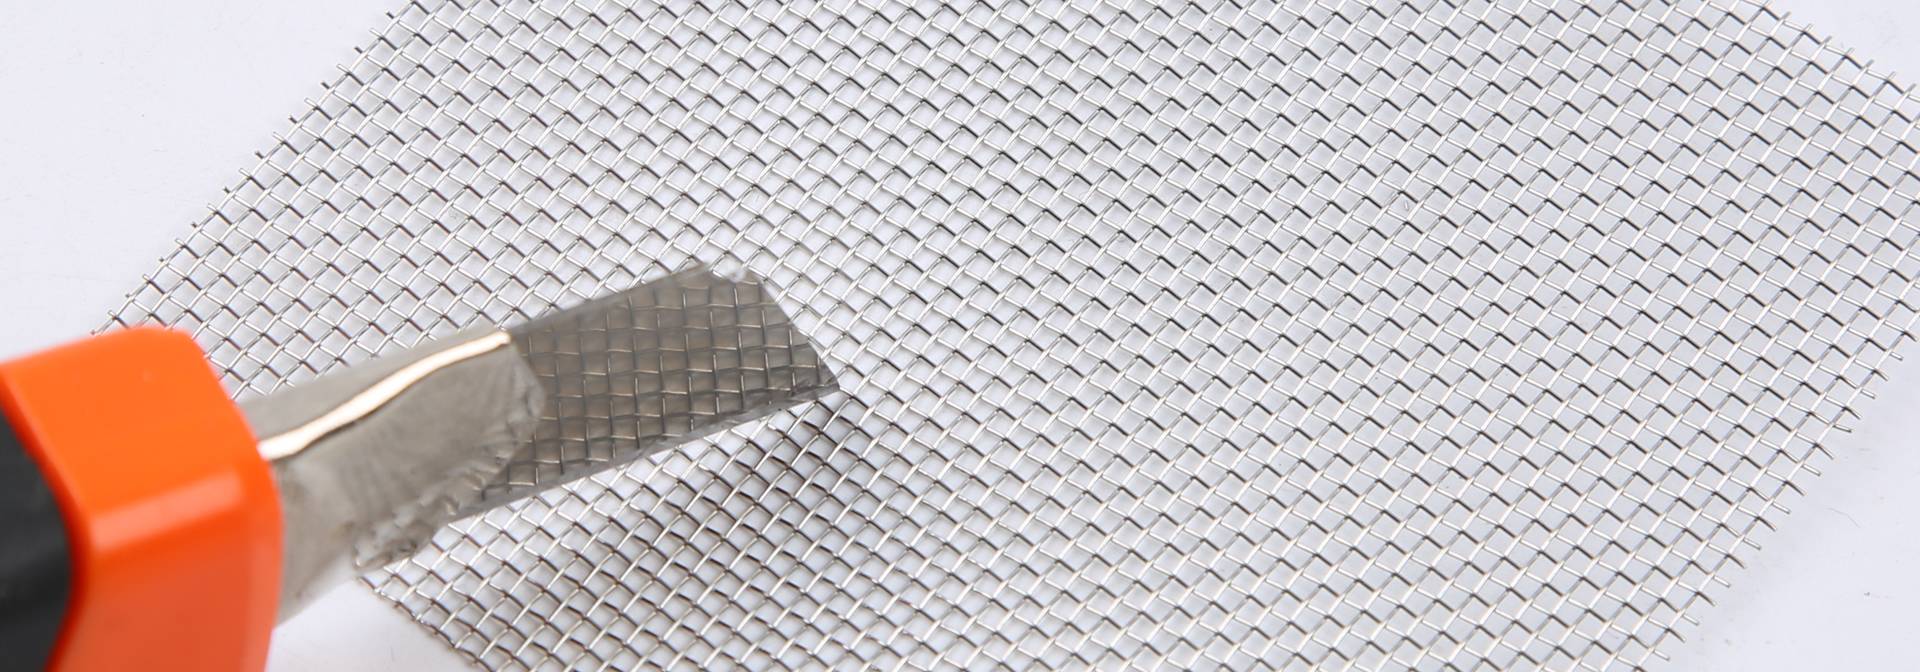 A knife on a sheet of stainless steel window screen mesh.